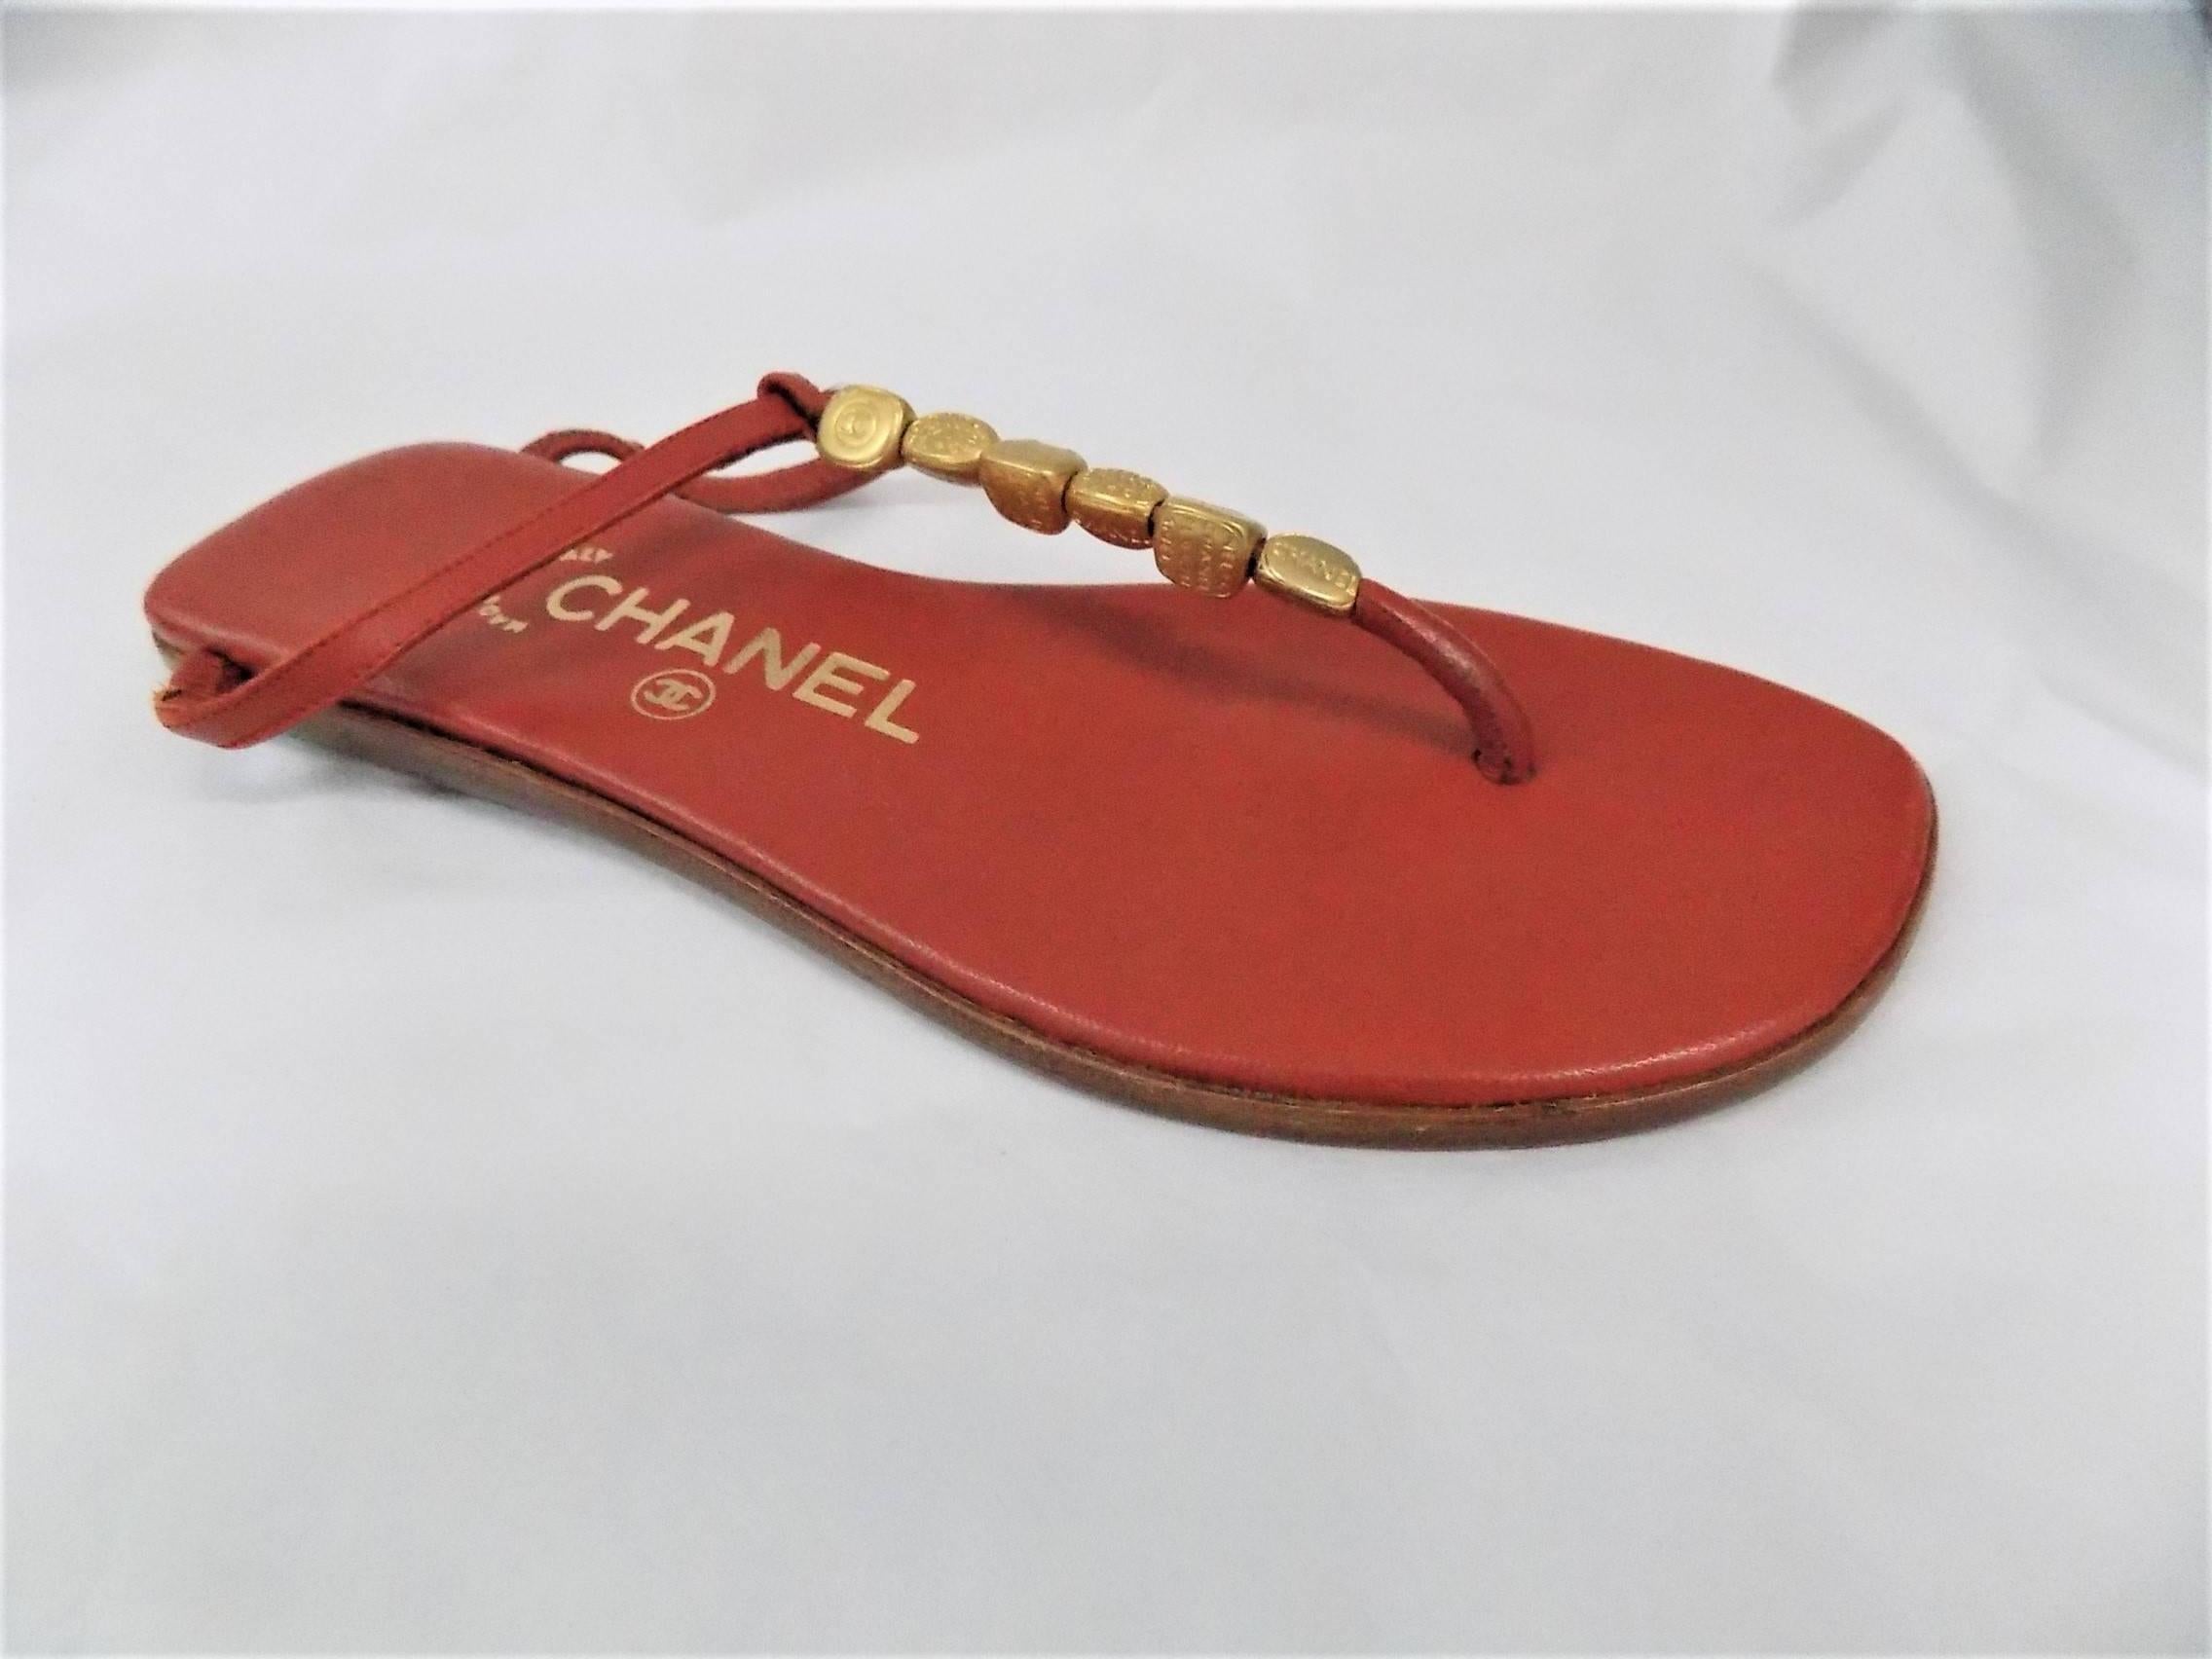 Red leather Chanel thong sandals with gold-tone logo bead embellishments, tonal stitching and stacked heels. Includes dust bag. Condition: Very Good. Faint wear at soles.Size 35